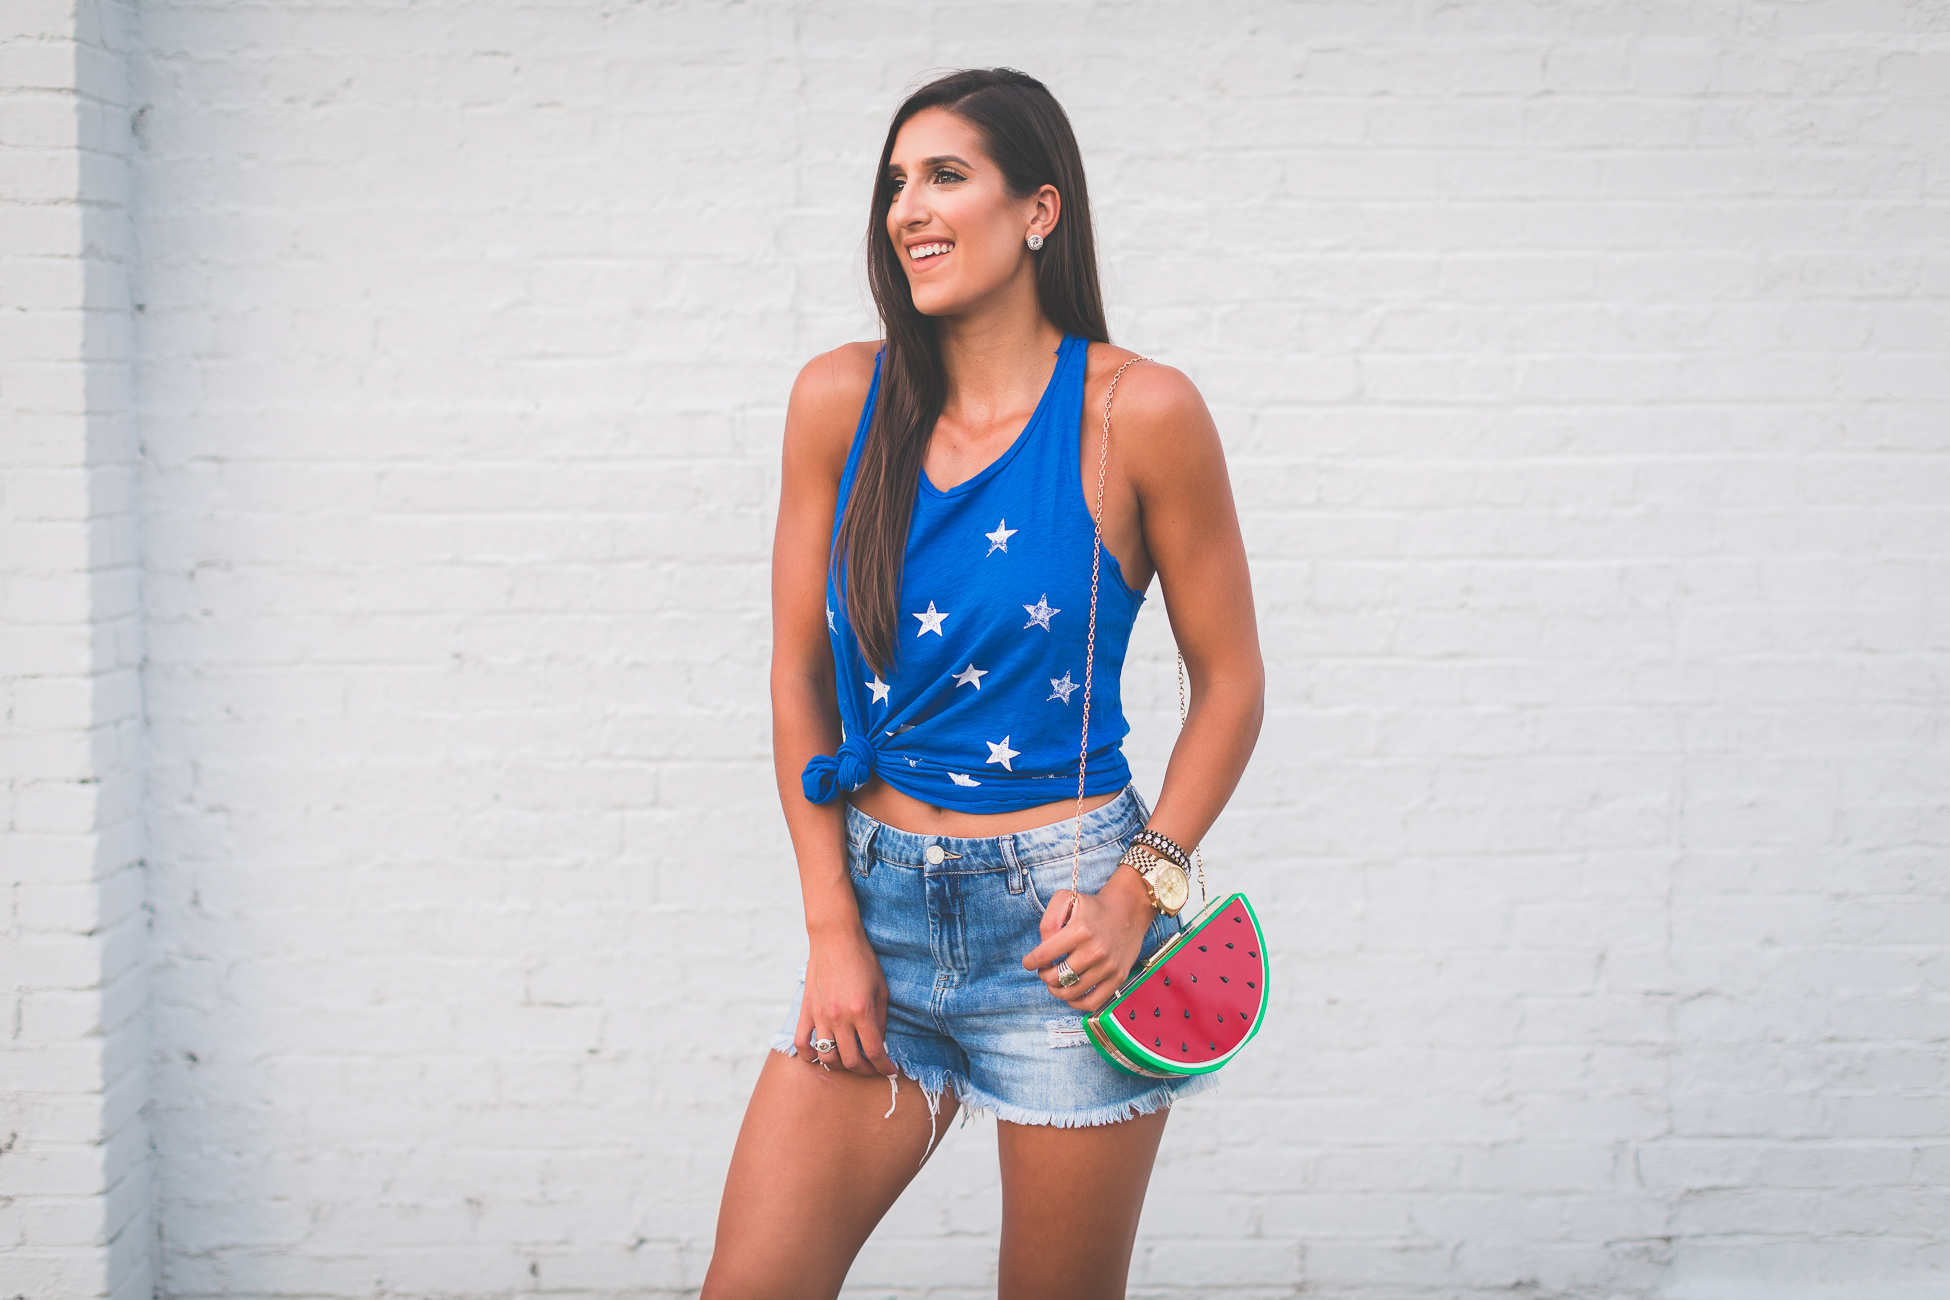 star print racerback tank, fourth of july outfit, fourth of july fashion, merican tank, star tank, watermelon purse, watermelon bag, watermelon crossbody bag, denim cutoffs, high waist denim shorts, high waist denim cutoffs, july fourth outfit ideas, fun july fourth outfits, fruit purse, summer outfit ideas, knotted tee, how to knot your tank, knotted tank, lace up sandals, lace up heels, sole society lyla sandals // grace wainwright a southern drawl